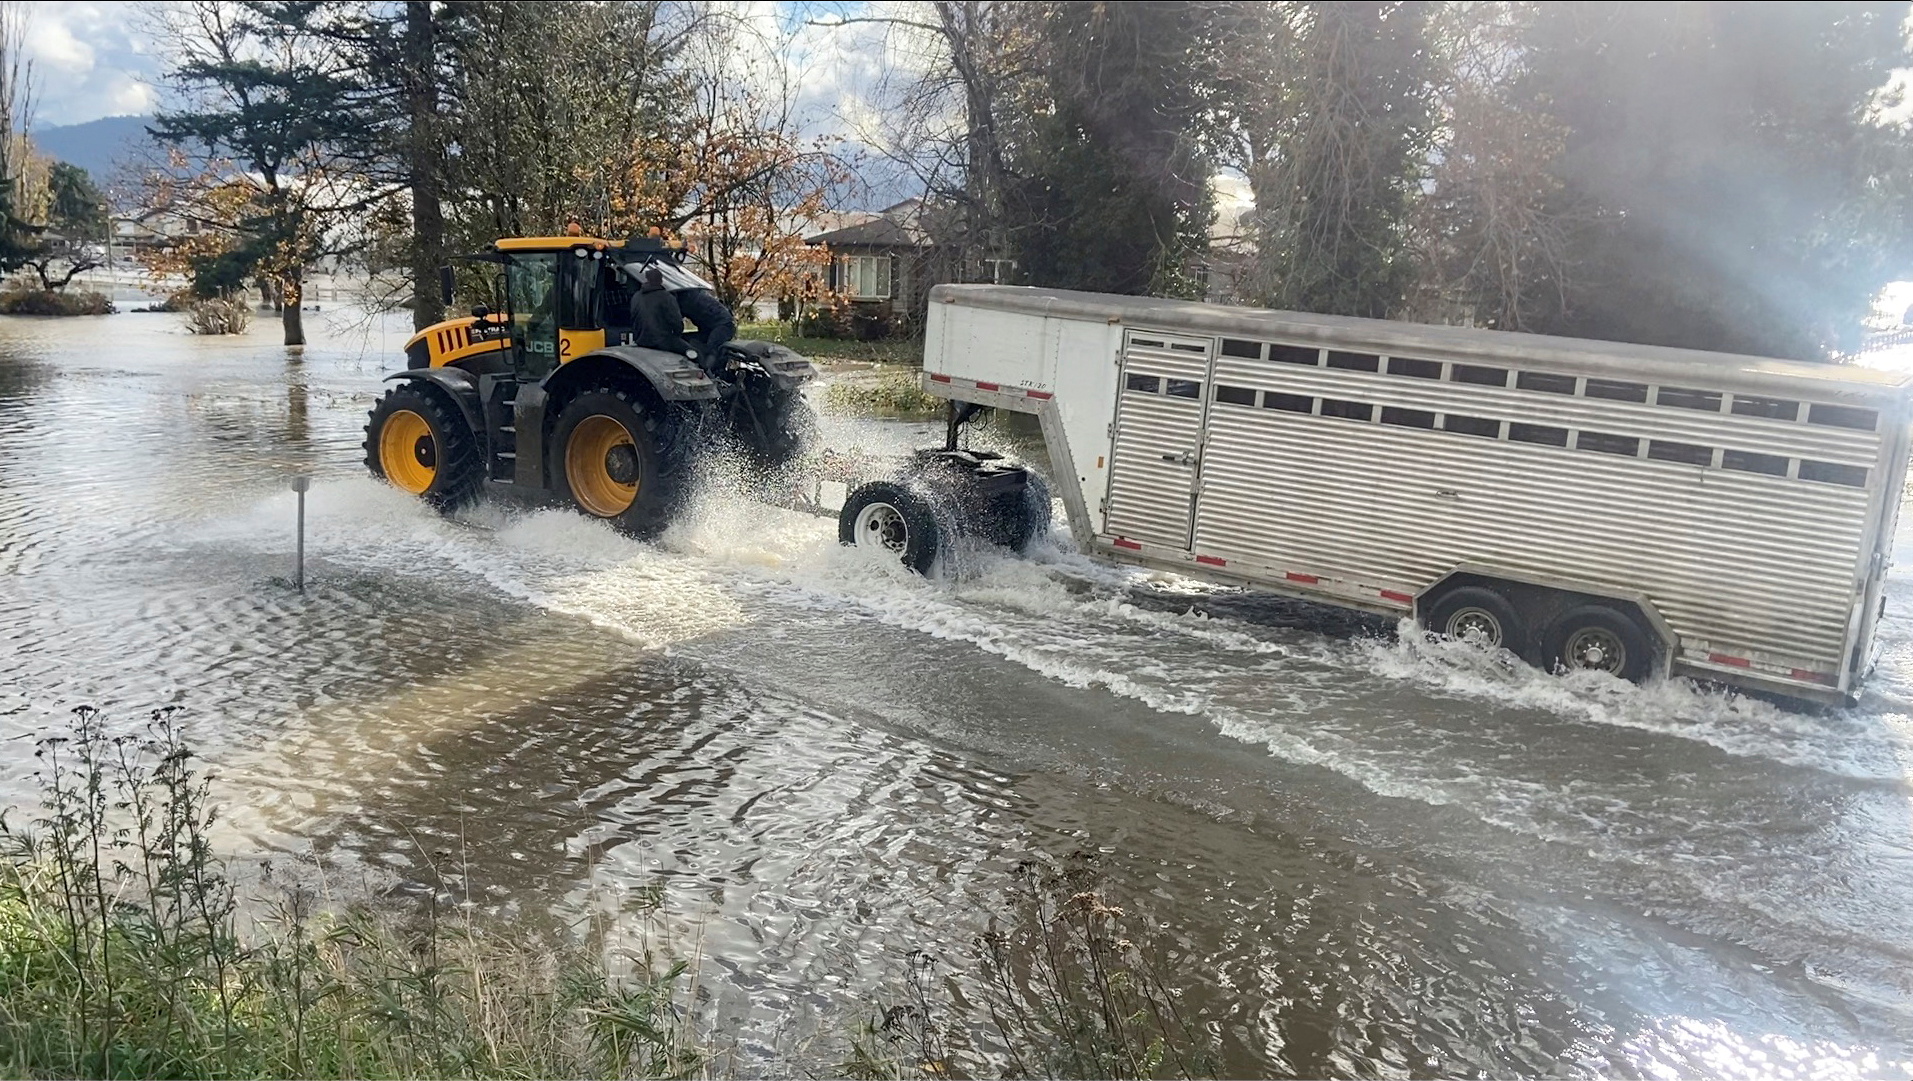 Farmers travel across flood waters to rescue their livestock in Abbotsford, British Columbia